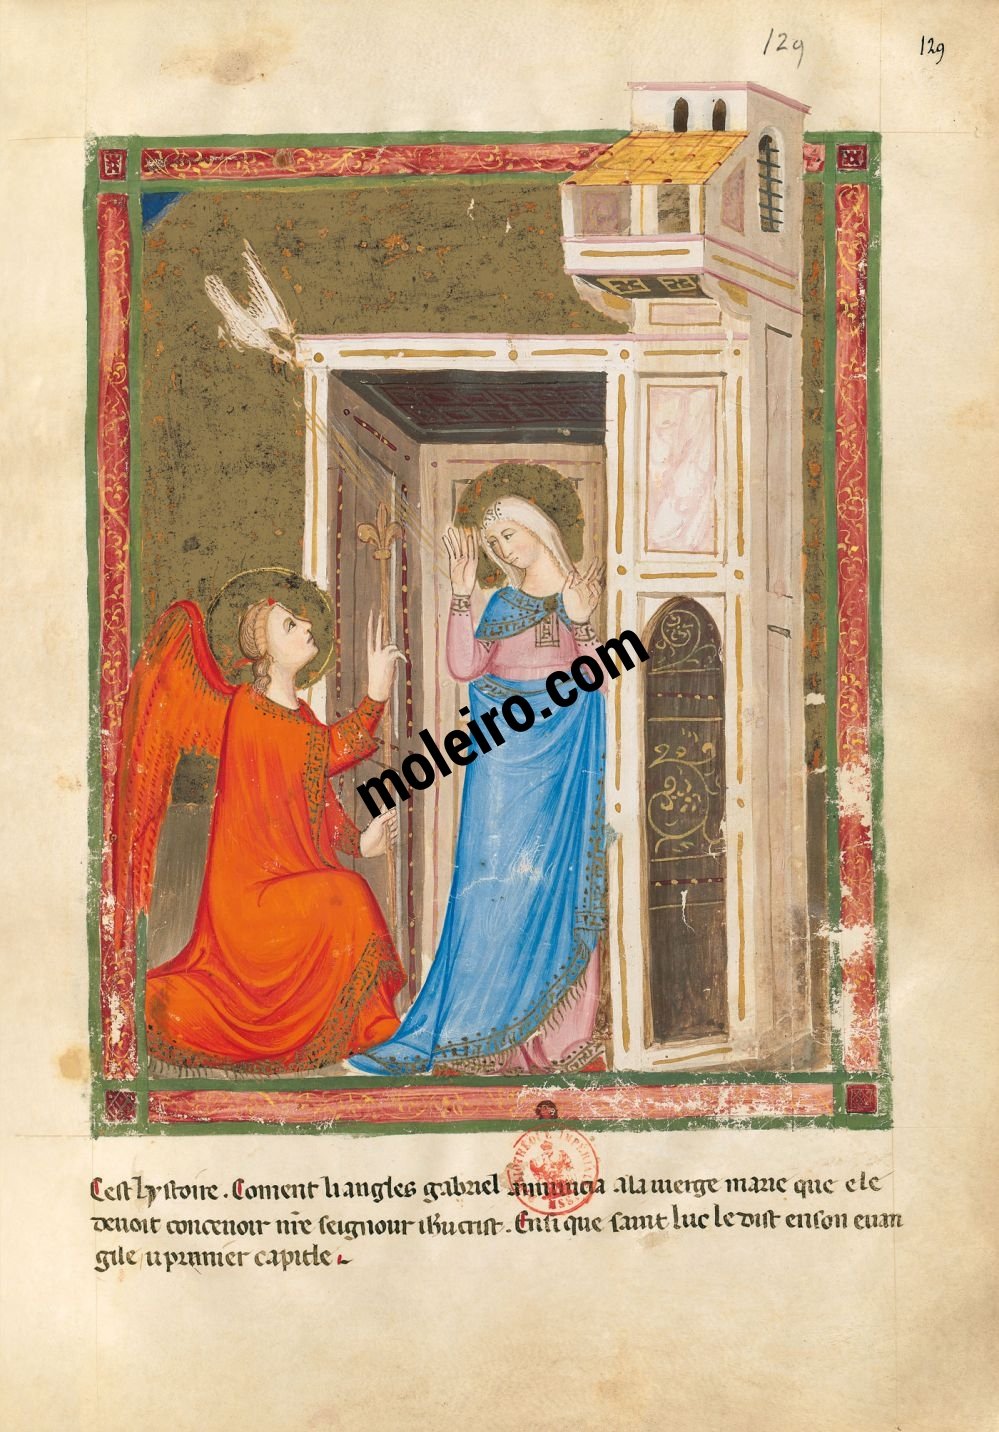 Bible moralisée of Naples f. 129r: The Annunciation (Luke 1: 31-38)